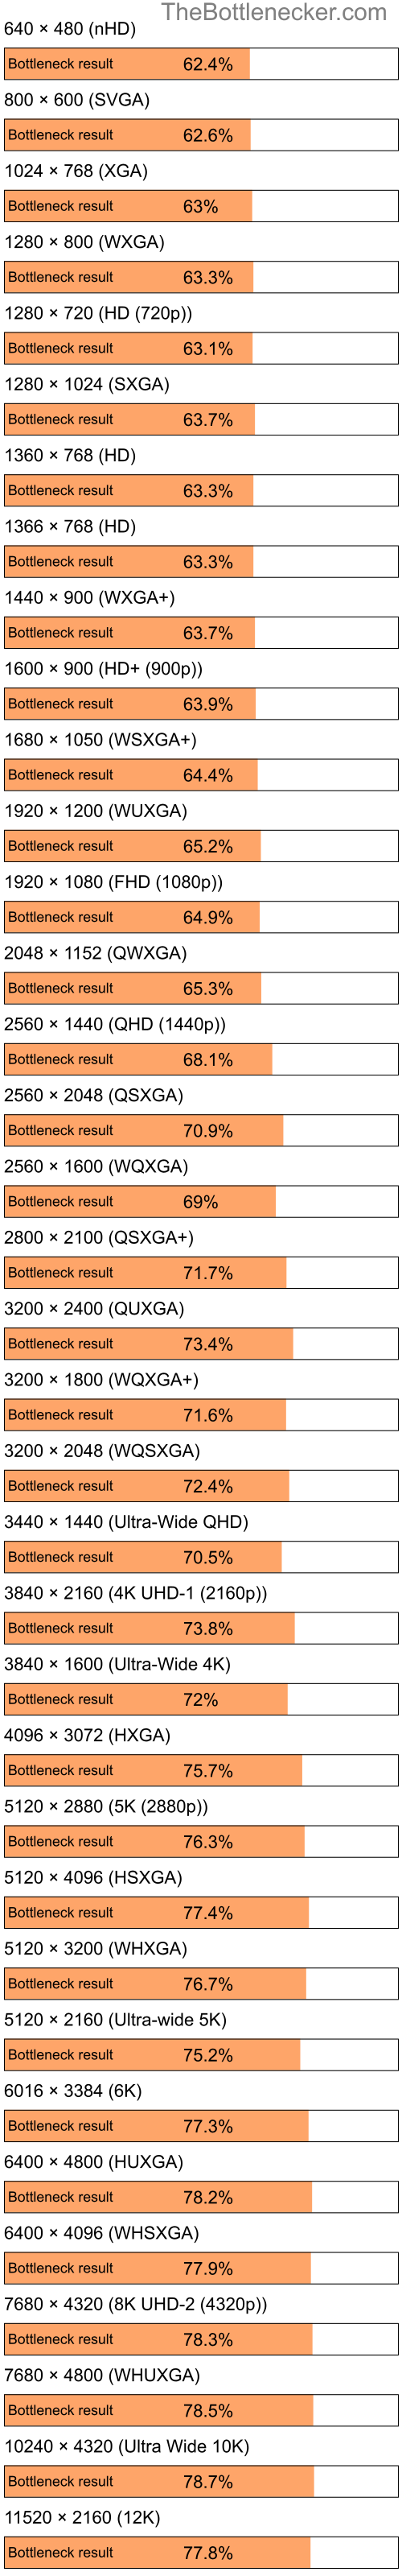 Bottleneck results by resolution for Intel Pentium 4 and NVIDIA GeForce 8600 GS in General Tasks